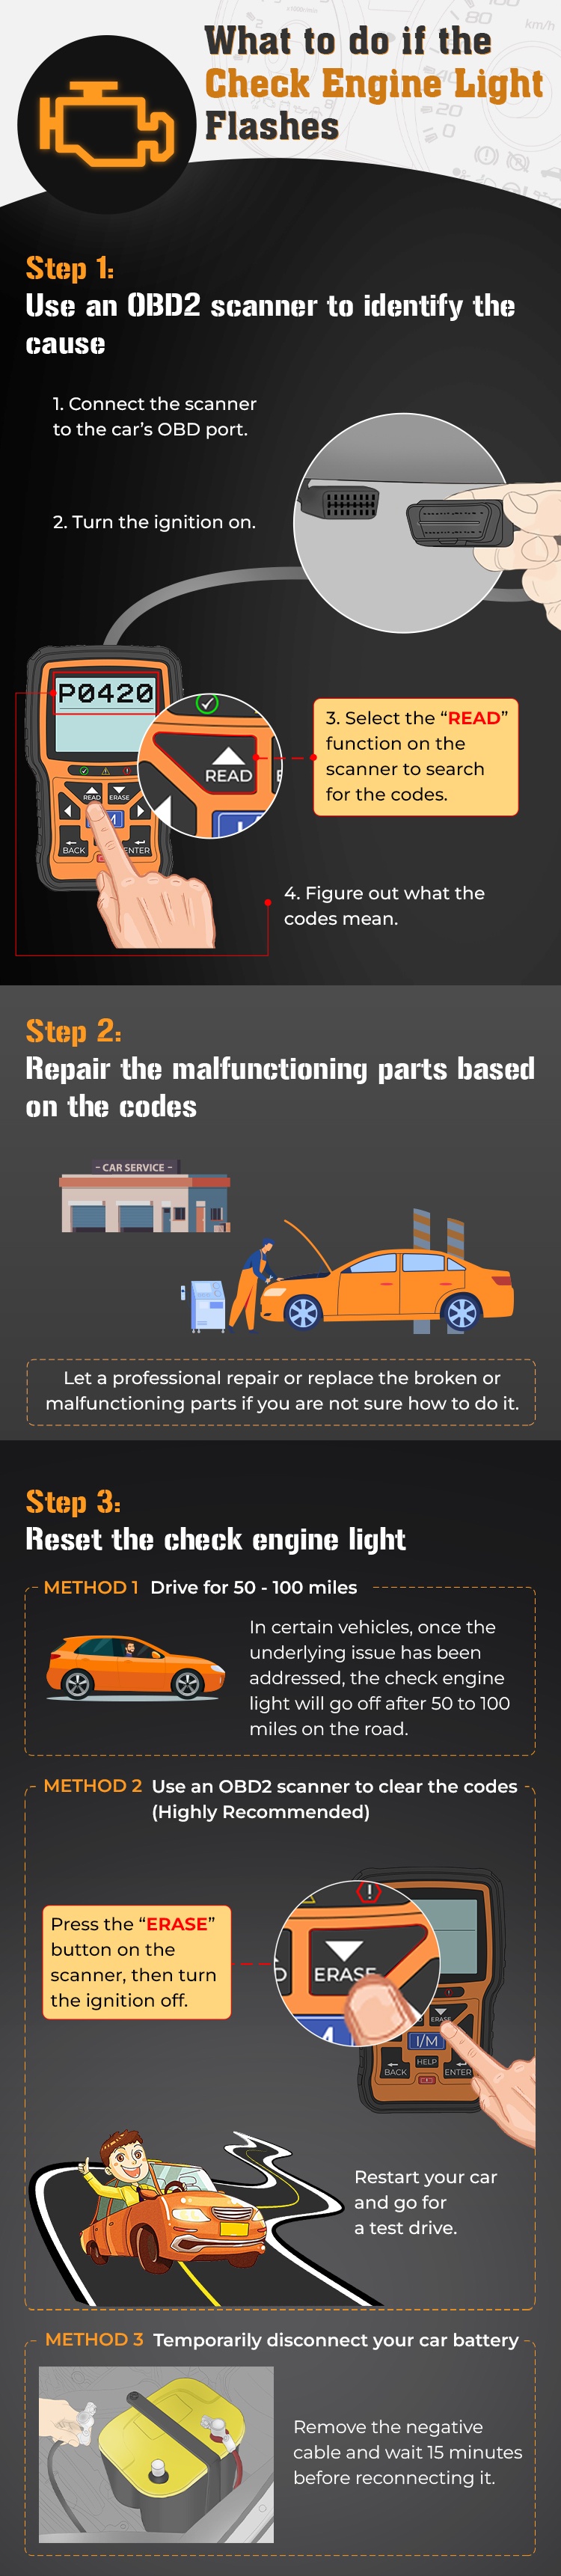 what to do if the check engine light flashes